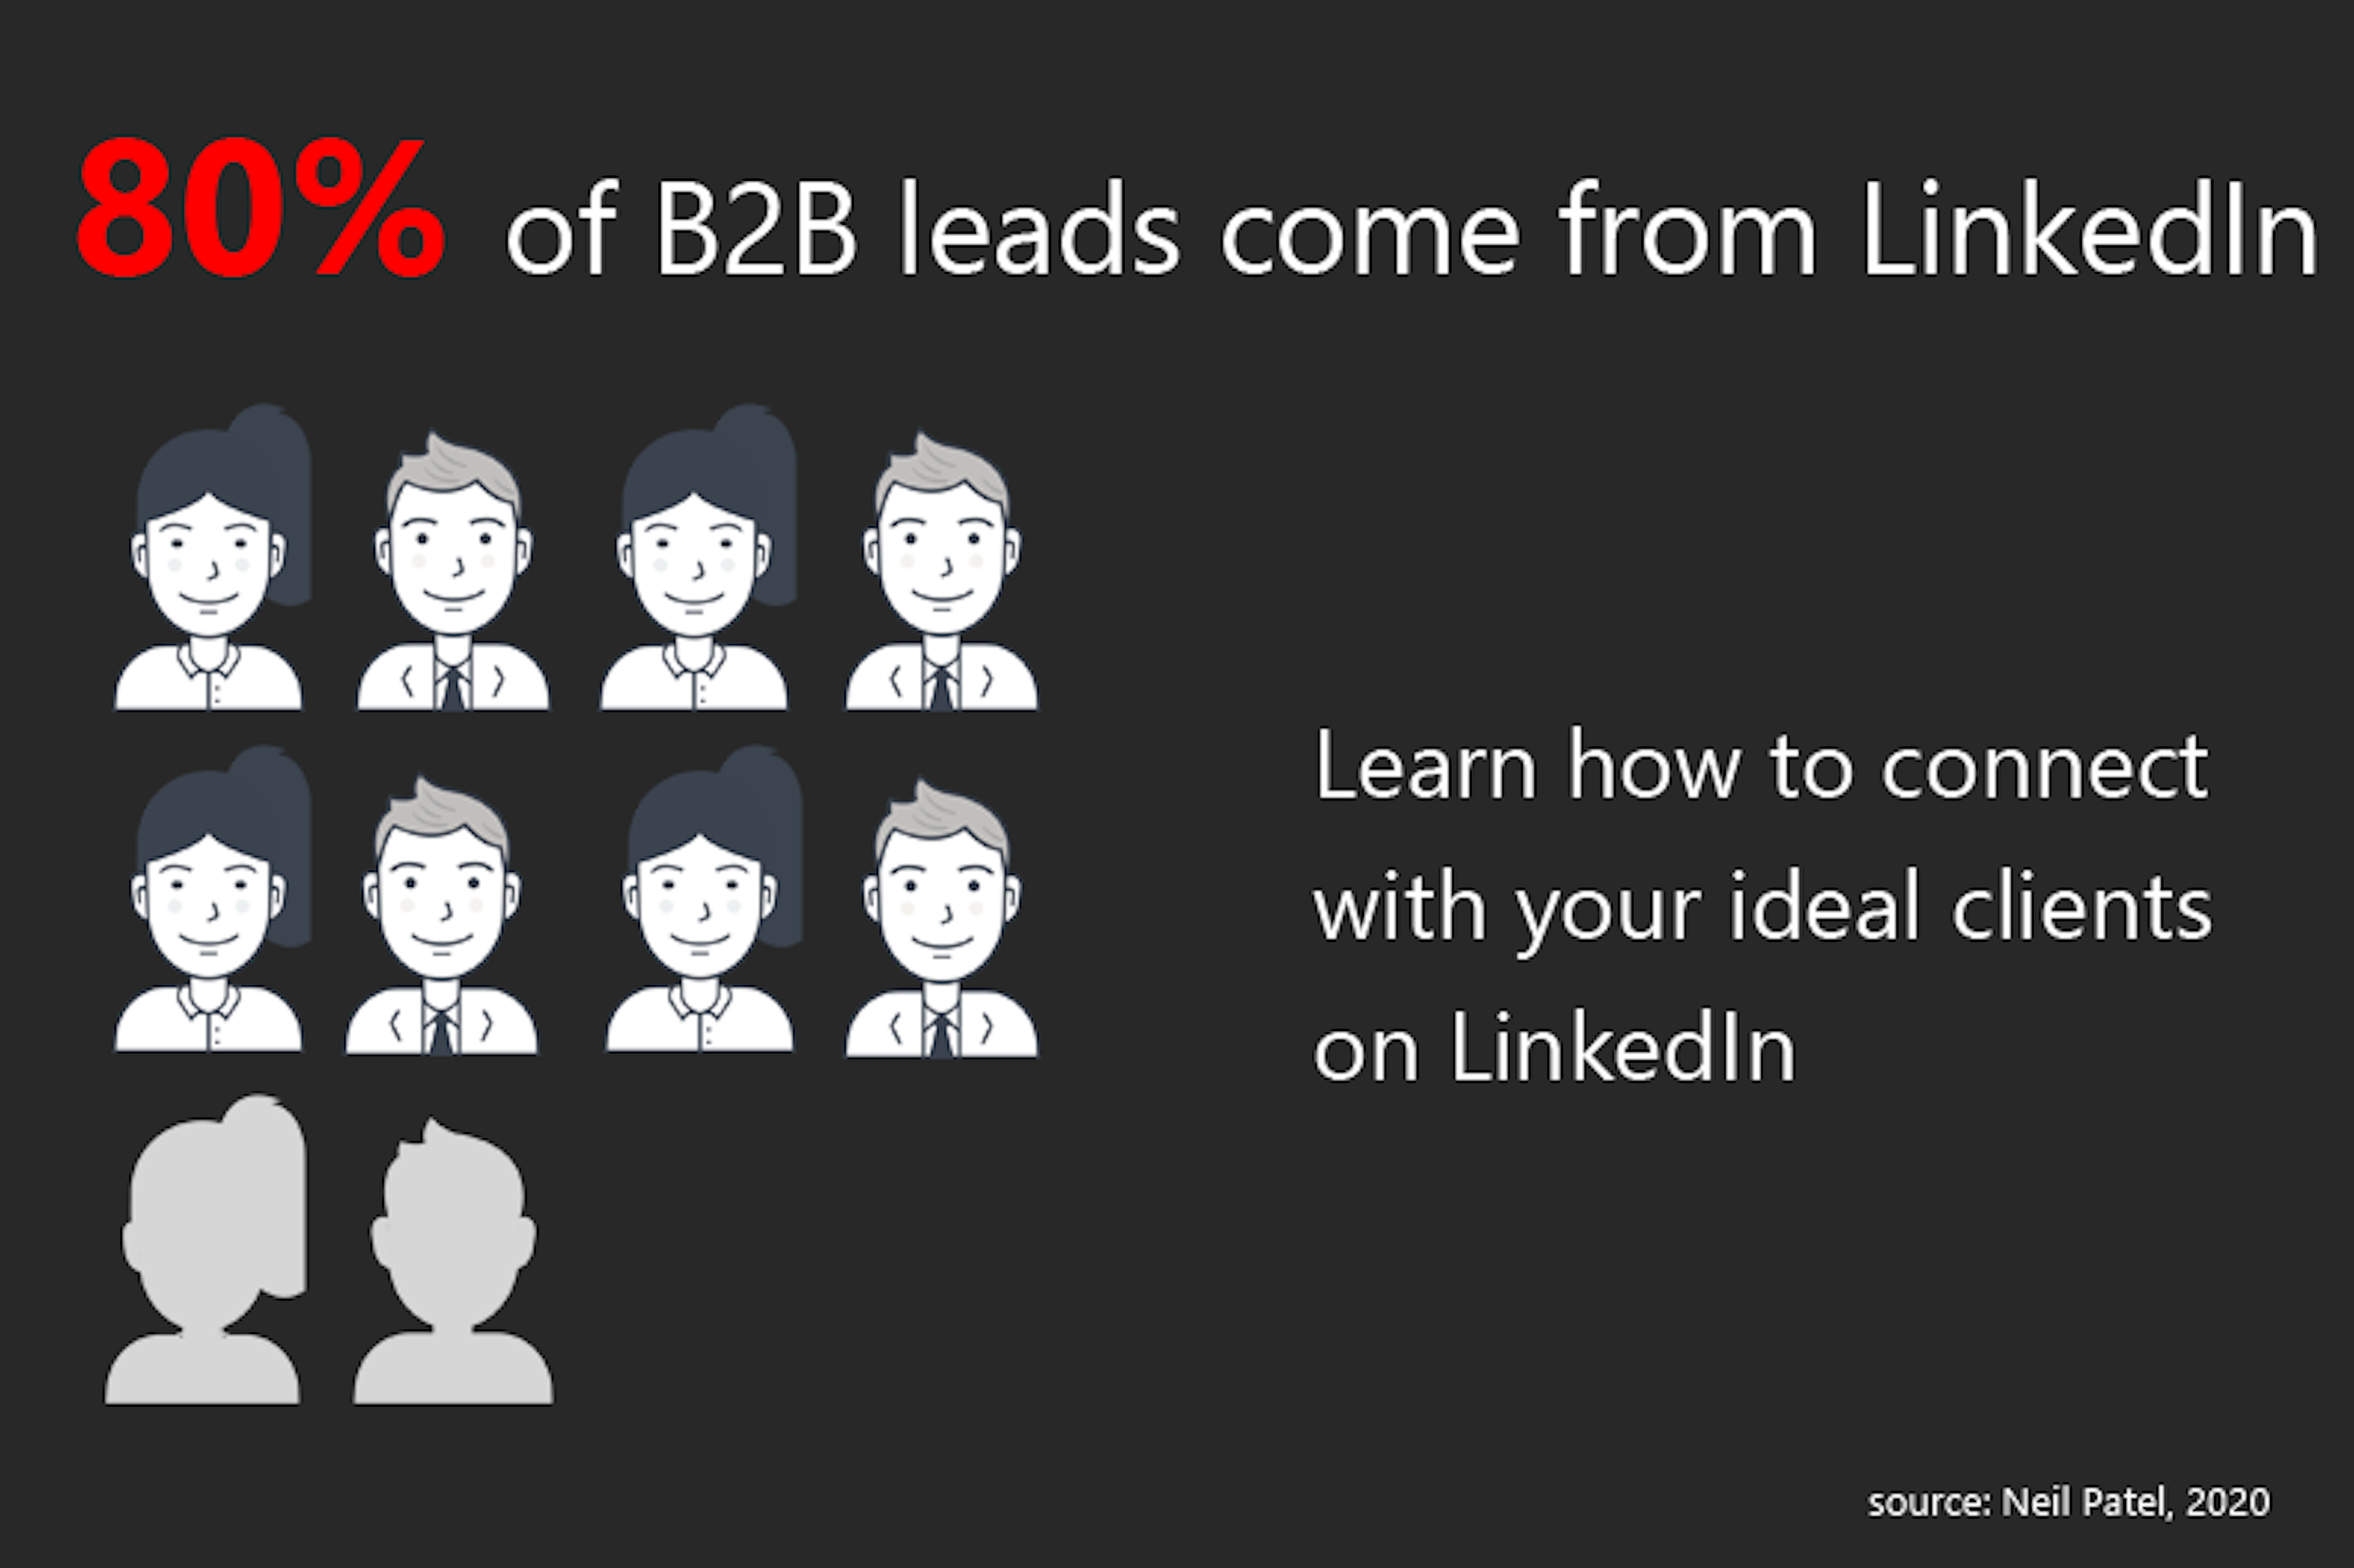 13 Steps to Engage With Your Ideal Clients on LinkedIn